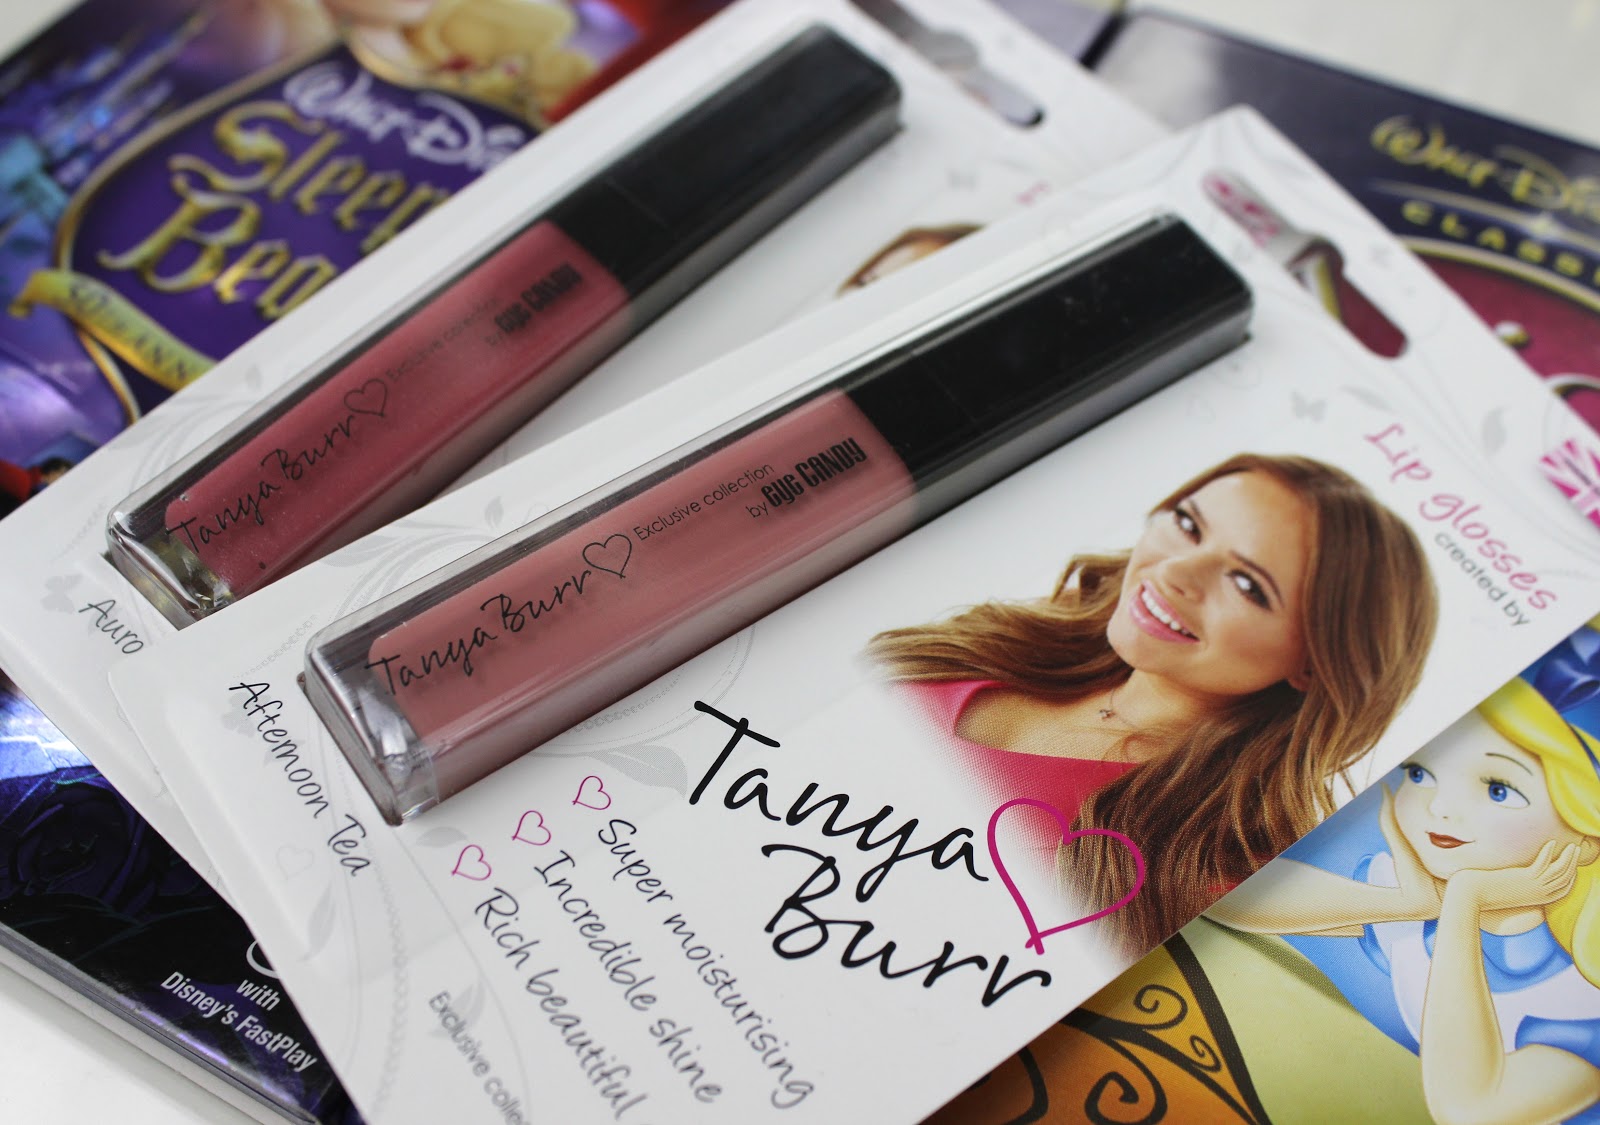 Tanya Burr Lips and Nails Lipgloss in Afternoon Tea and Aurora